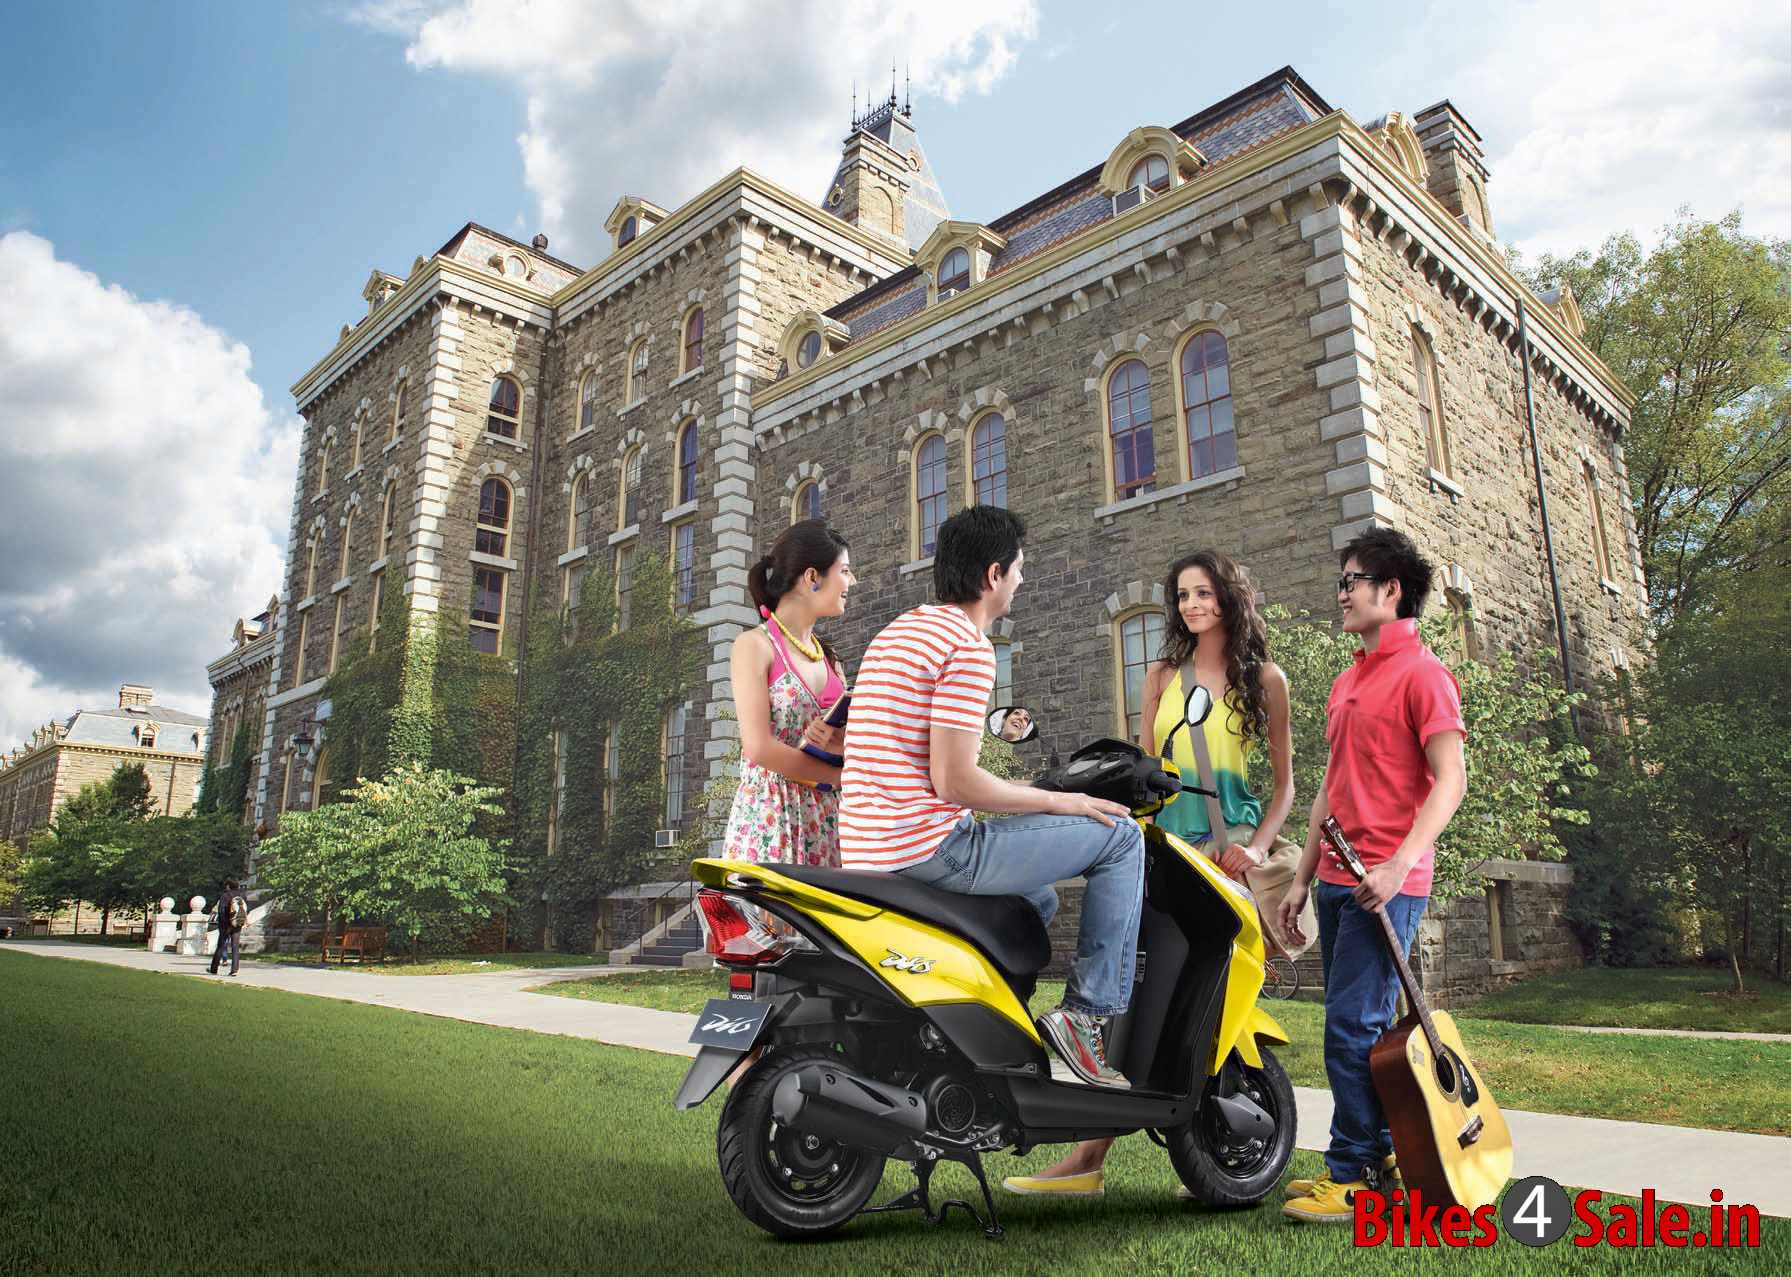 Honda Dio - College dates. Without pertrol breaks. The new and improved Dio is here, with an outstanding mileage